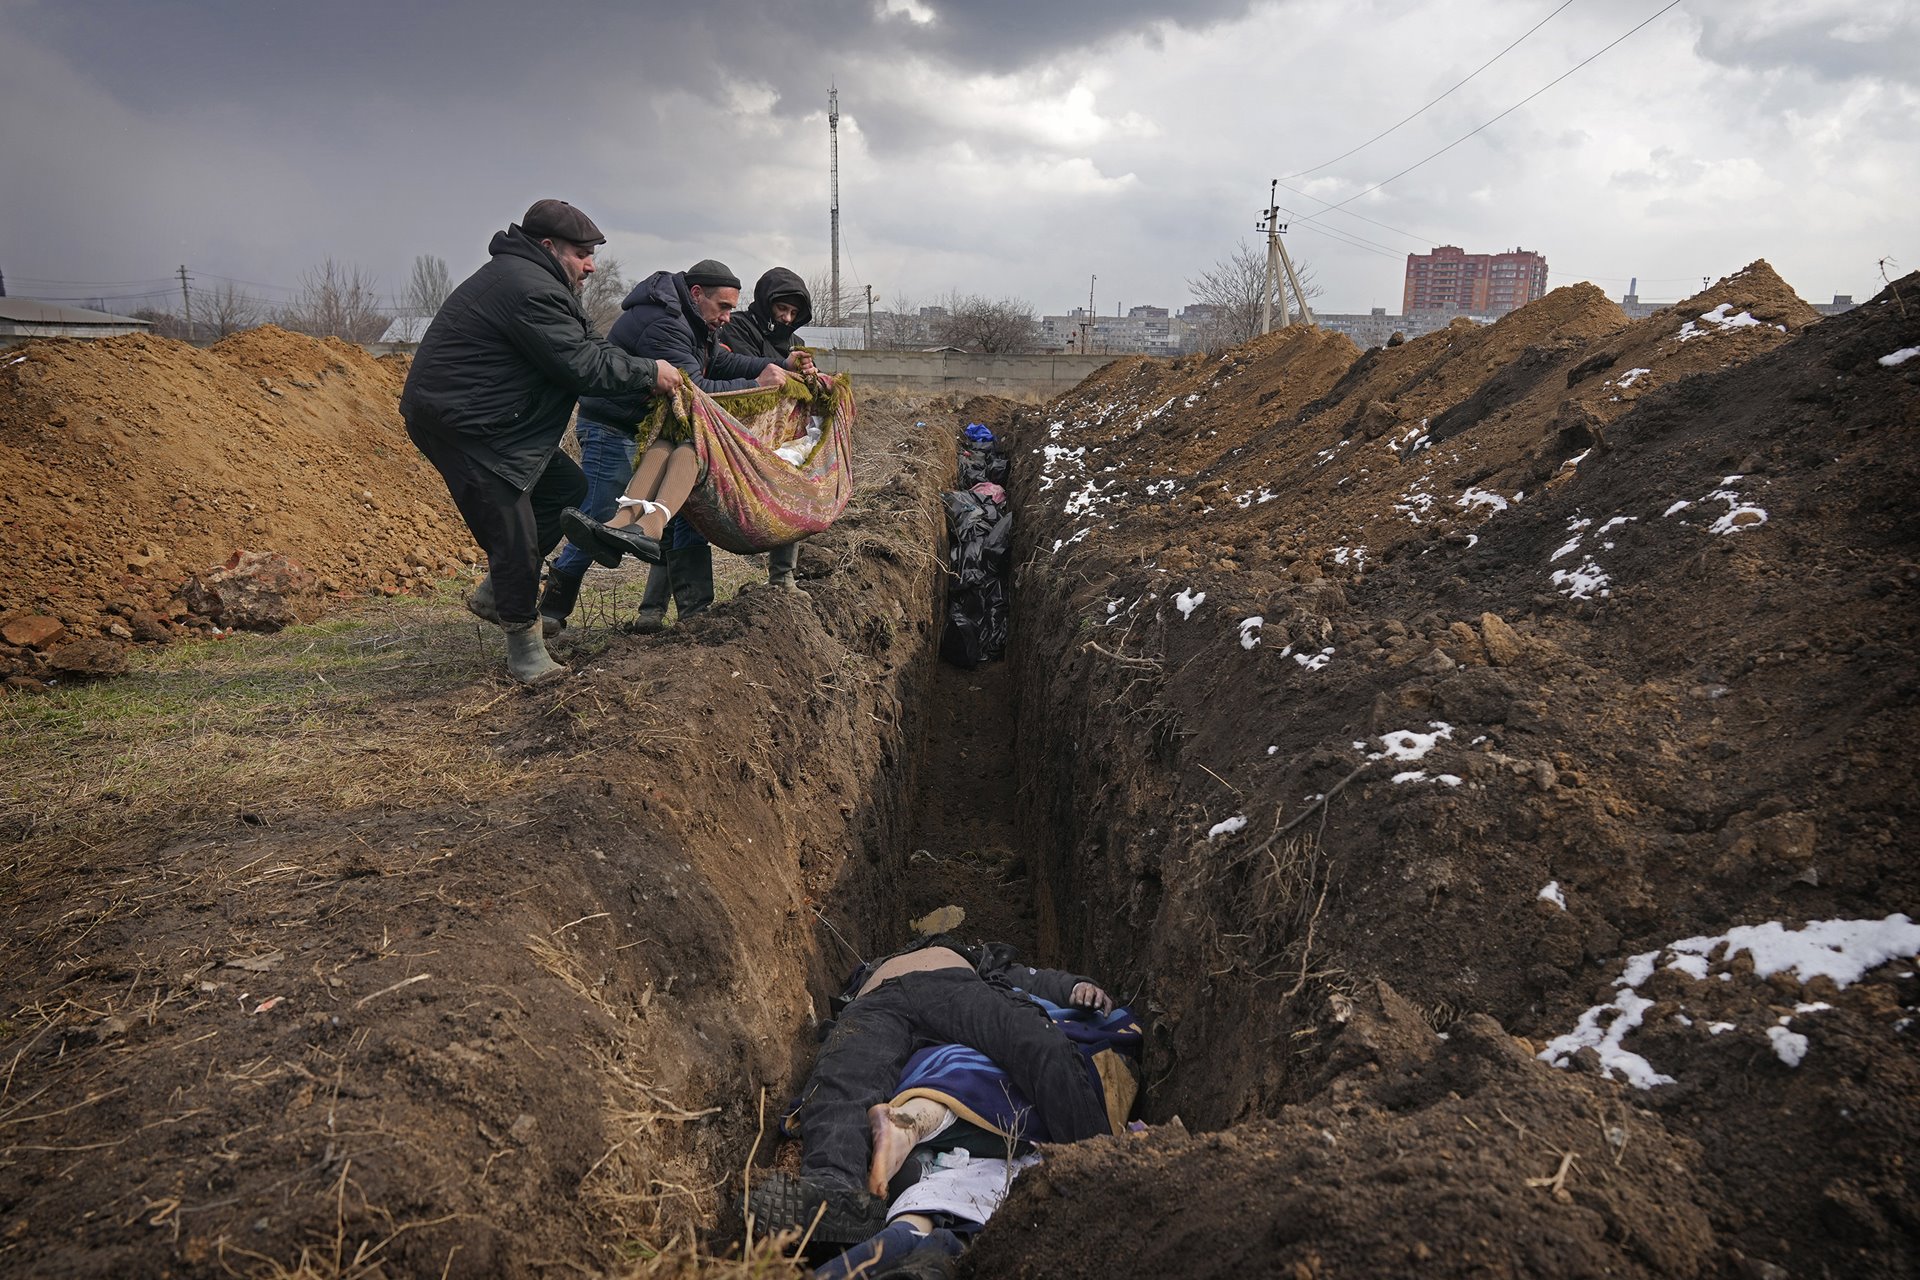 <p>People place dead bodies in a mass grave in an old cemetery in Mariupol. According to the BBC, on some days during periods of heavy Russian shelling, up to 150 people a day were buried in mass graves.</p>
